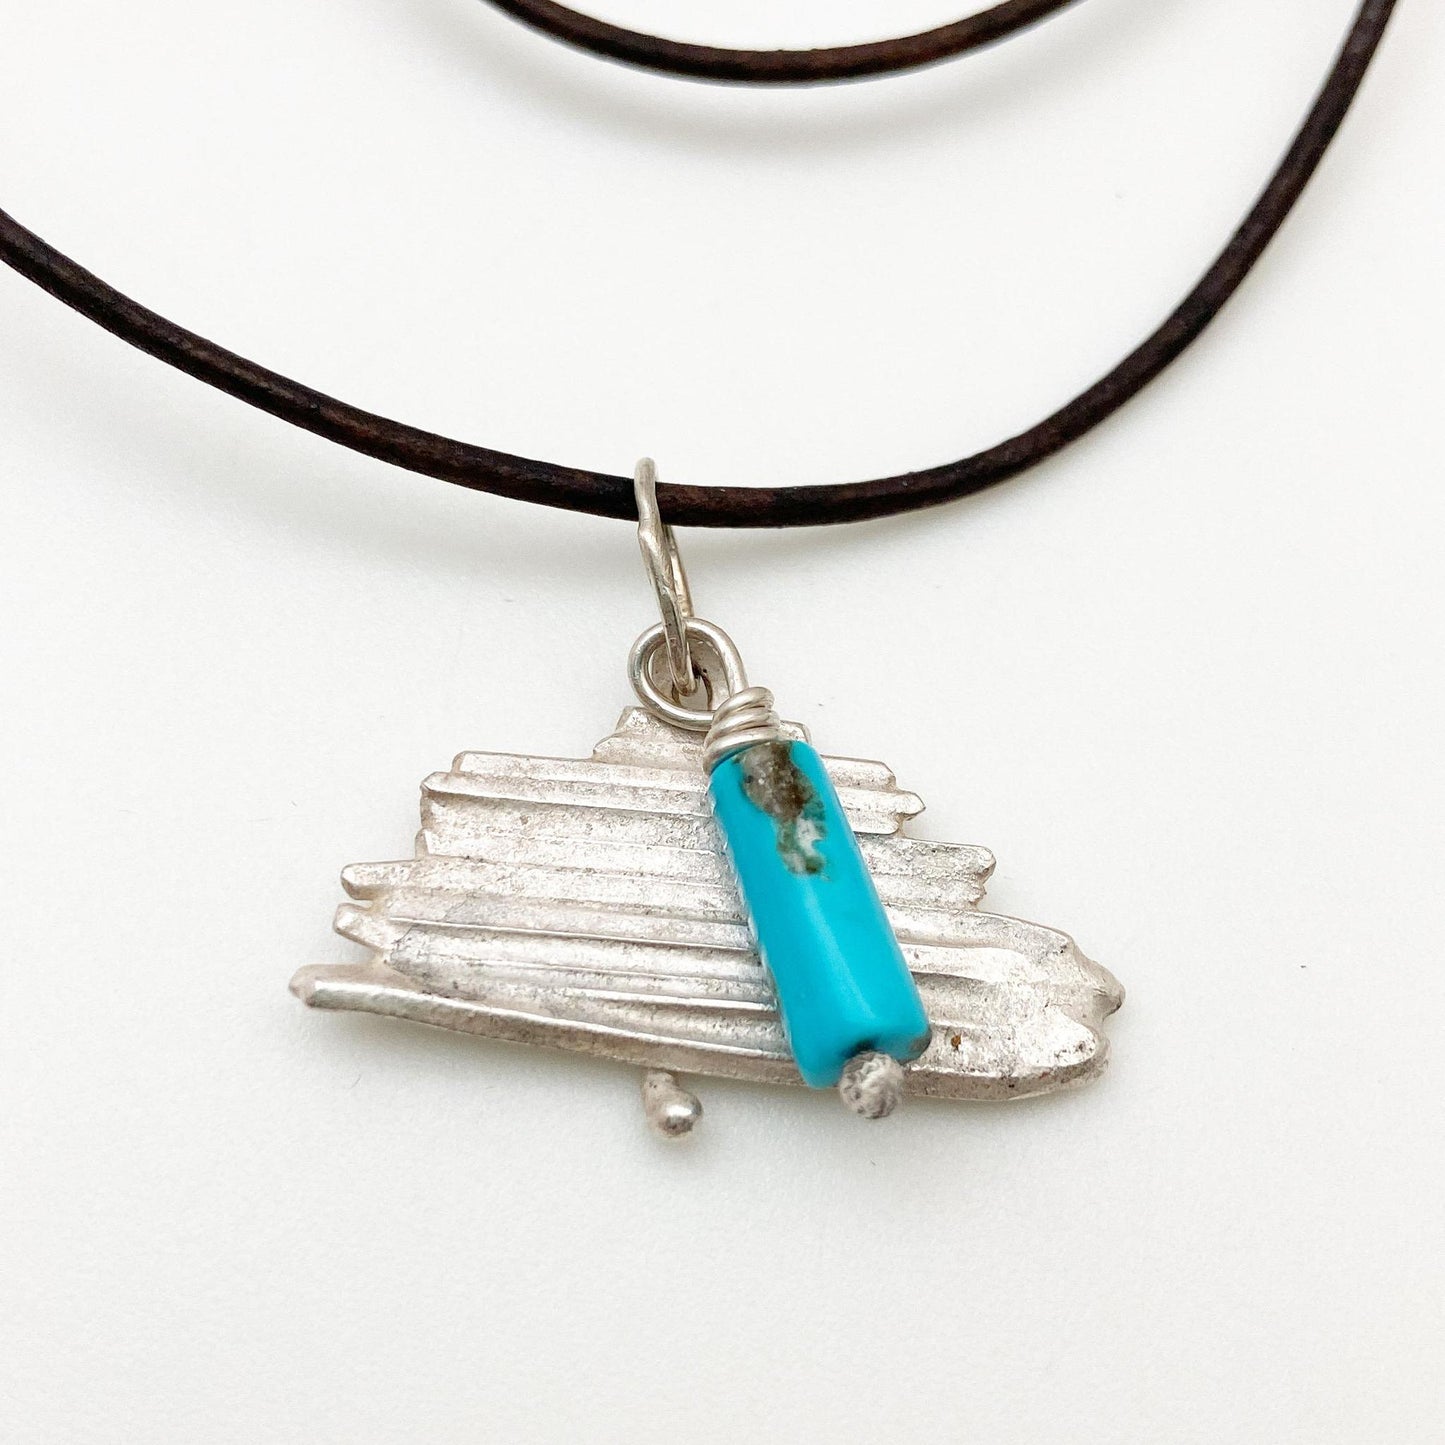 Necklace - Sterling "Cedar Bark" and Turquoise on Leather